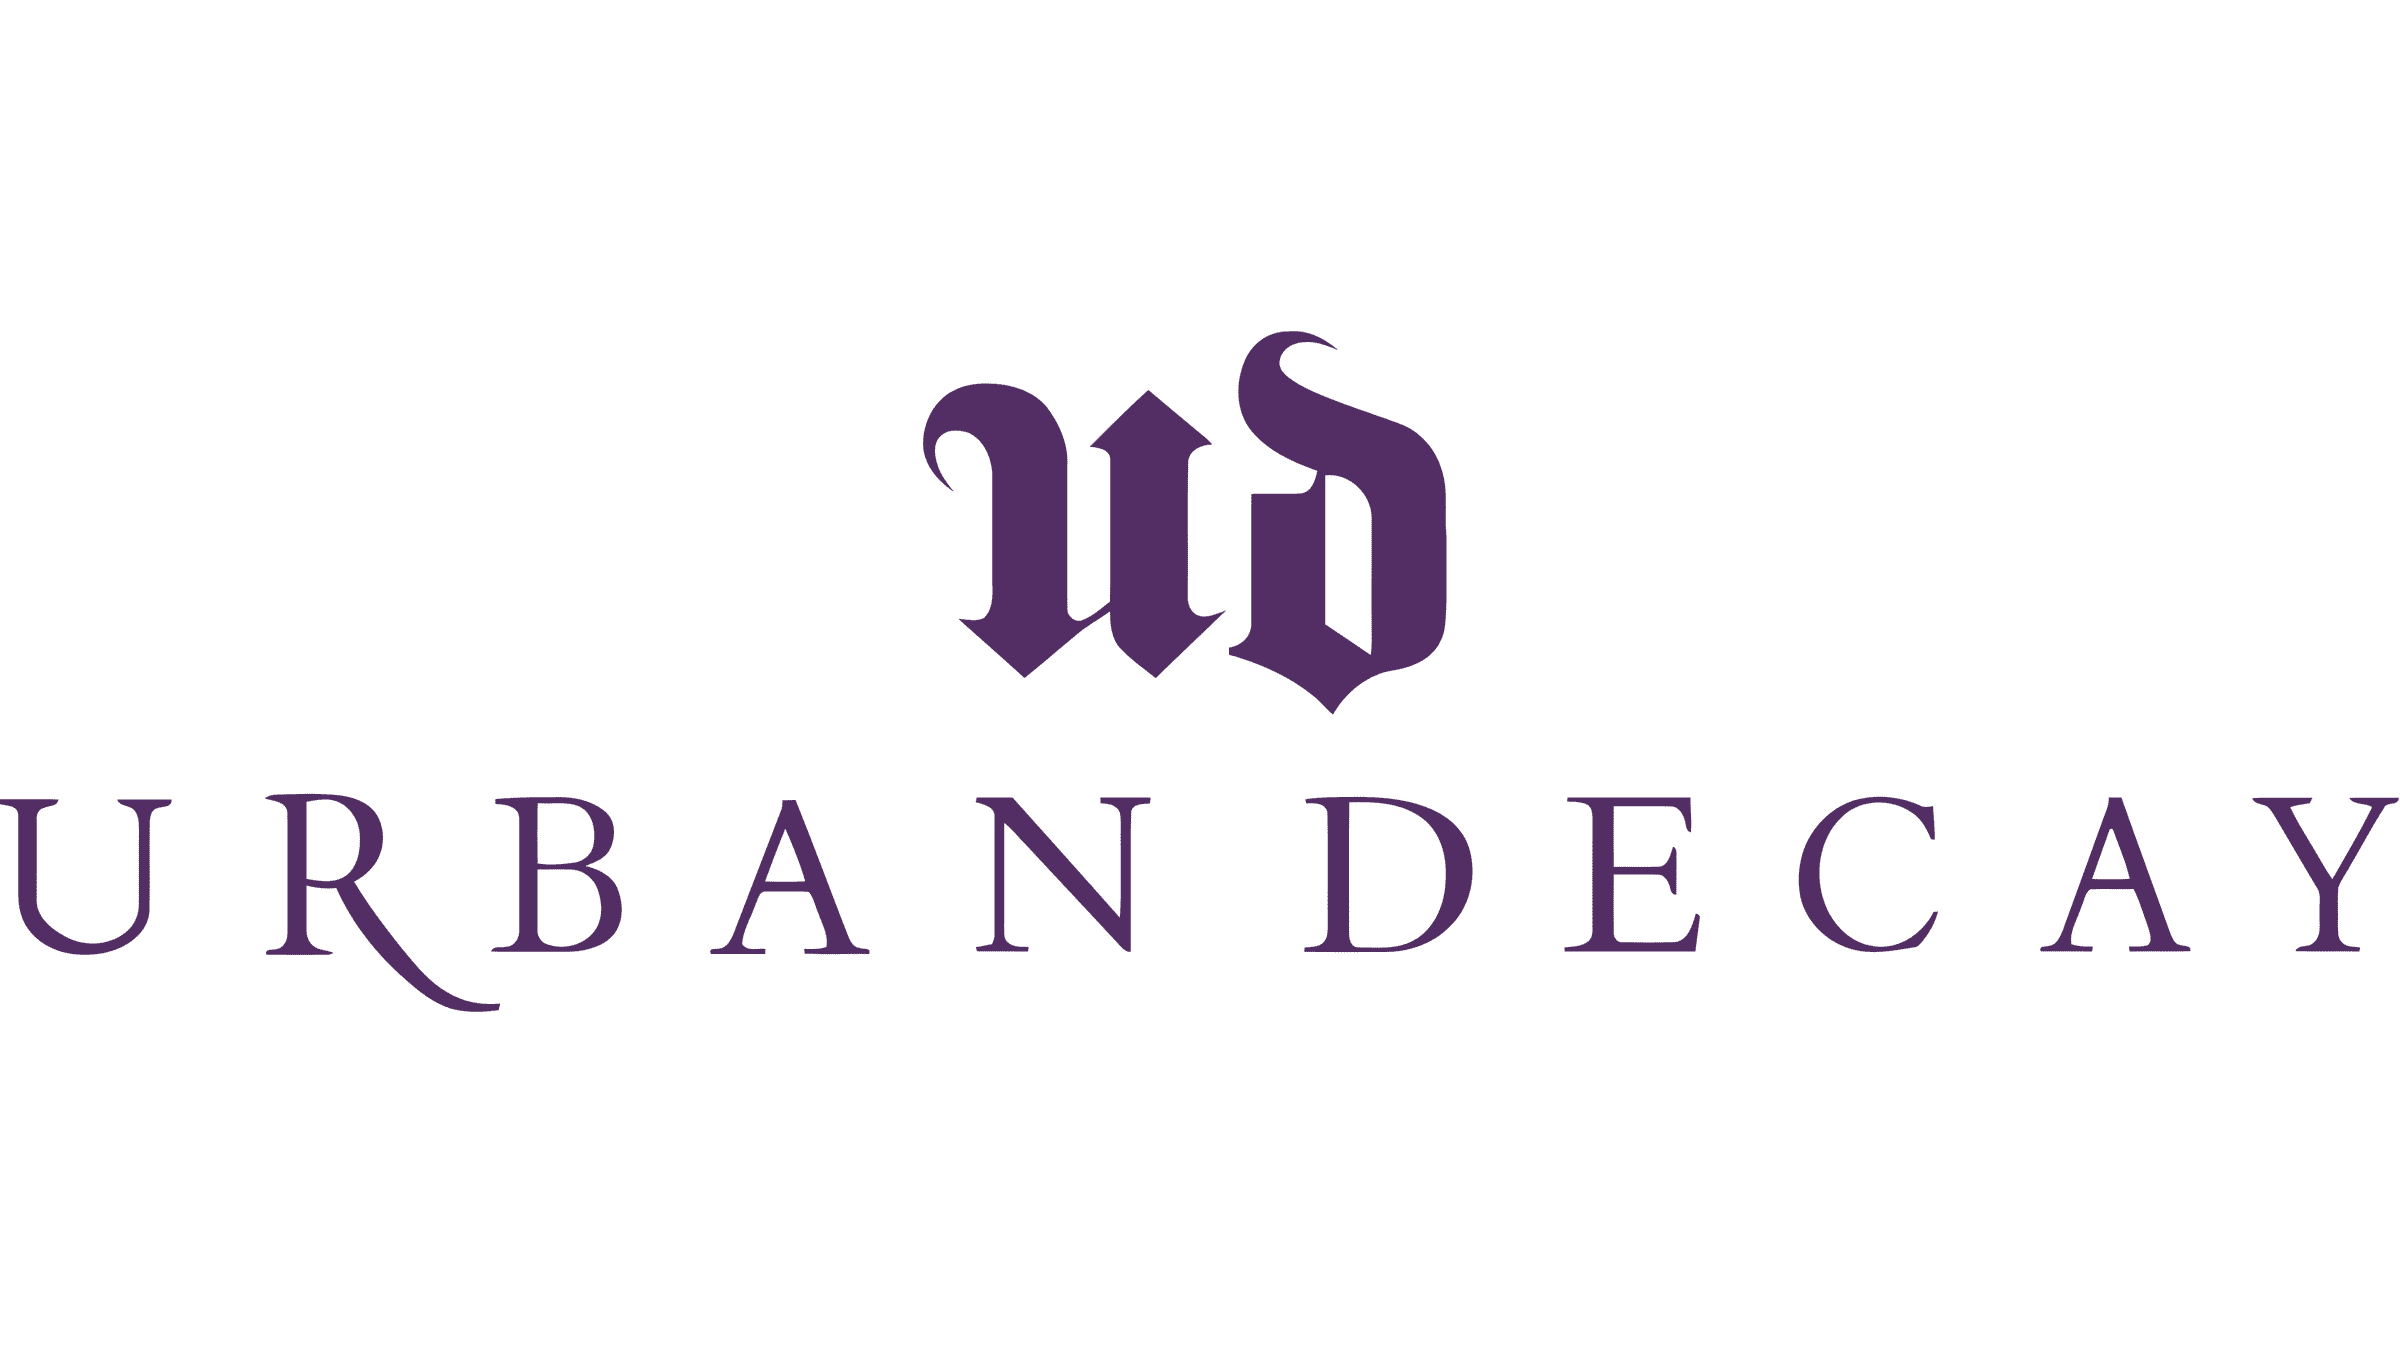 Urban Decay logo and symbol, meaning, history, PNG